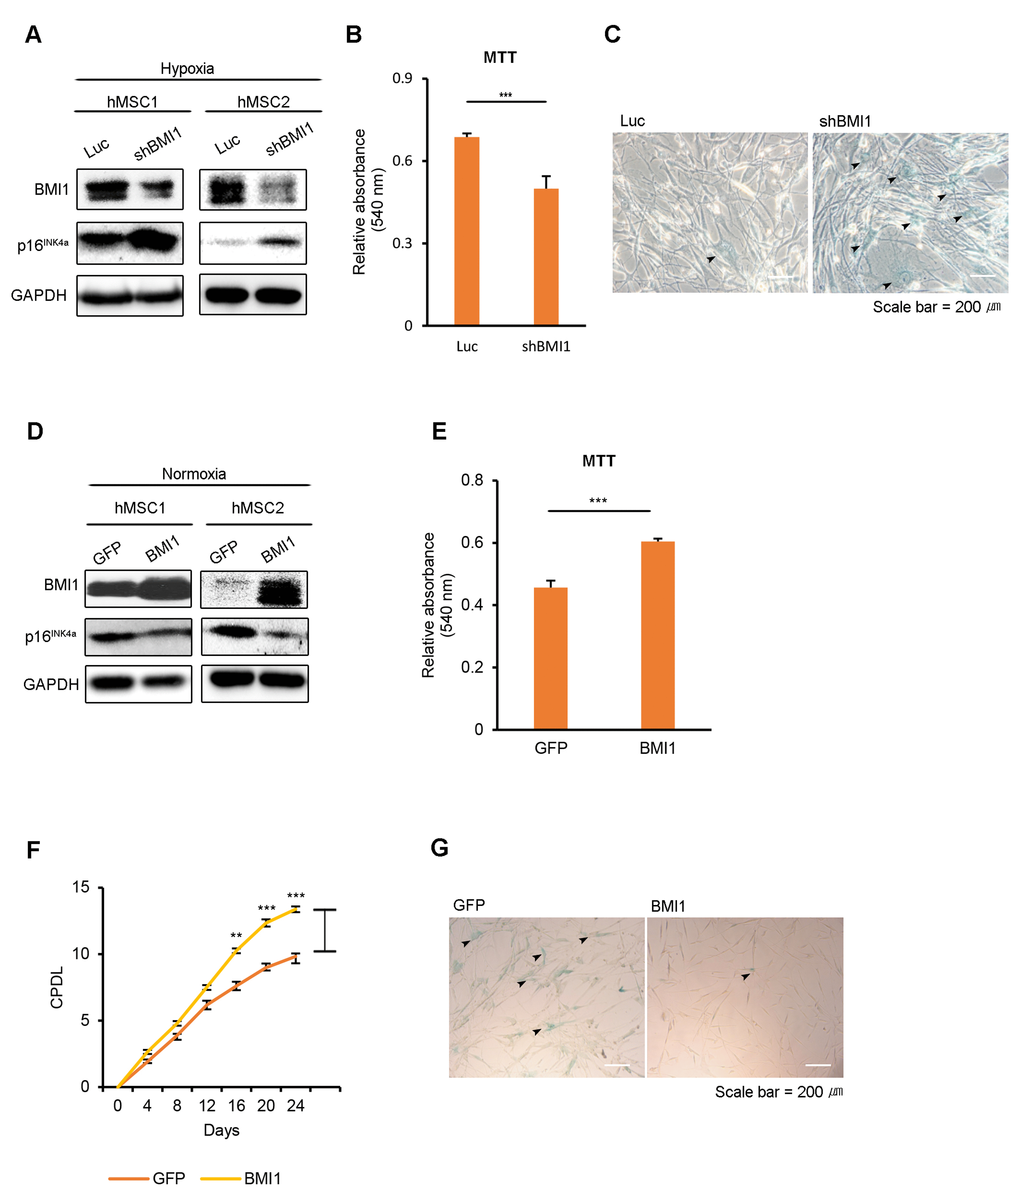 BMI1 regulates cellular senescence in hUCB-MSCs. (A-C) To assess the role of BMI1 in hypoxia, hypoxic-cultured hUCB-MSCs were transfected with Luc control and shBMI1, and the senescence phenotype was investigated. (A) Expression levels of BMI1 and p16INK4a proteins were confirmed via western blot analysis. (B) To assess the proliferation of BMI1-down-regulated hUCB-MSCs, an MTT assay was performed. (C) The senescent state of cells was confirmed via SA-β-gal staining. (D-G) To confirm the effects of BMI1 on cellular senescence, normoxic-cultured hUCB-MSCs were induced to overexpress GFP and BMI1. (D) Western blot analysis was performed to confirm the expression levels of BMI1 and p16INK4a proteins. (E) MTT assay was conducted to evaluate the proliferation of BMI1-up-regulated hUCB-MSCs. (F) After the overexpression of BMI1, CPDLs were determined to evaluate the proliferative ability of the hUCB-MSCs. (G) After several passages, the senescent state of cells was confirmed via SA-β-gal staining. The results show 1 representative of 3 independent experiments. Error bars represent mean±s.e.m. from three separate experiments. ** PPt-test.